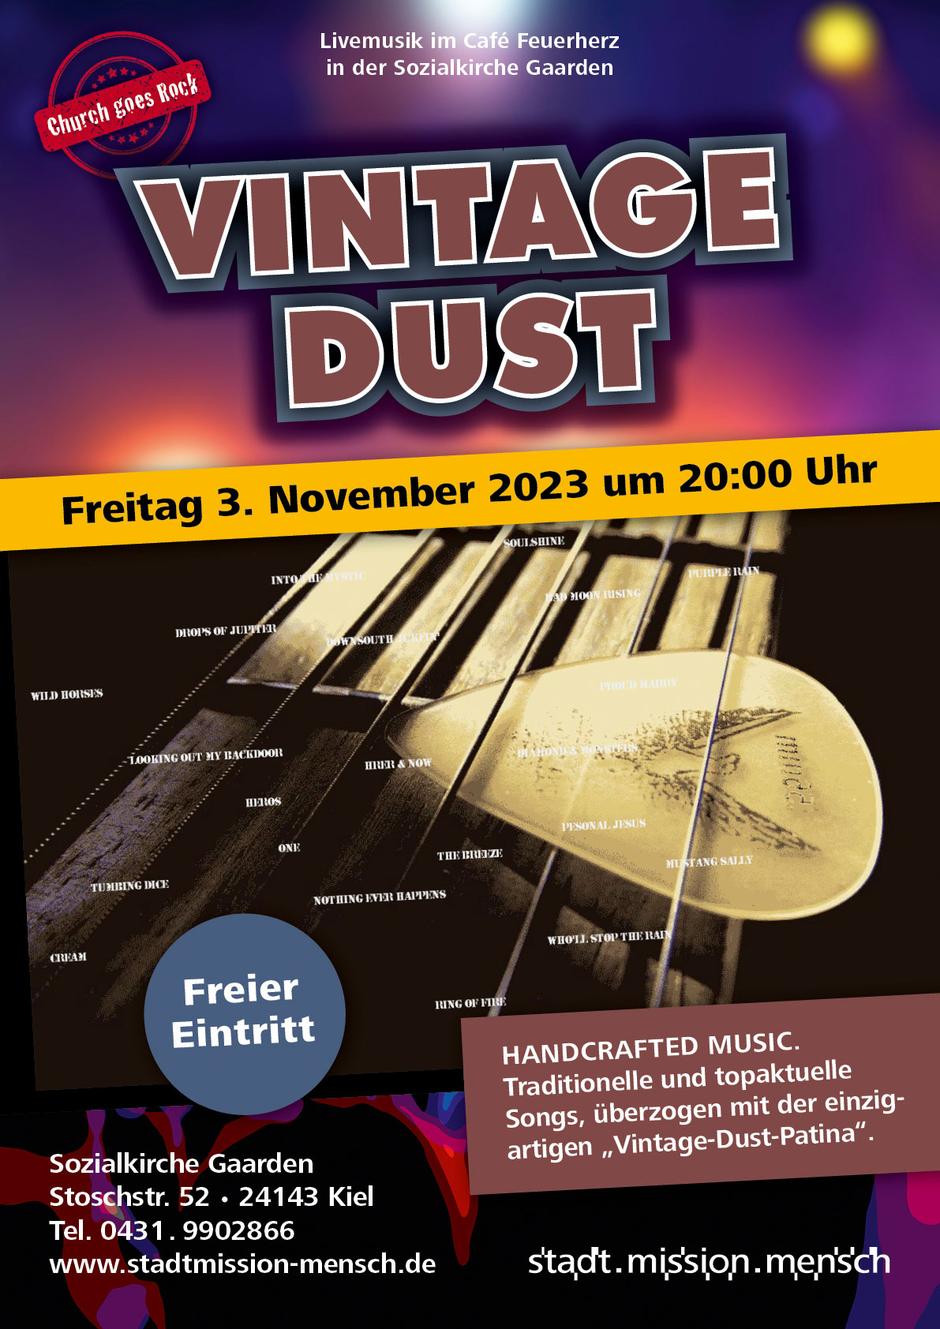 Vintage Dust – Handcrafted Music